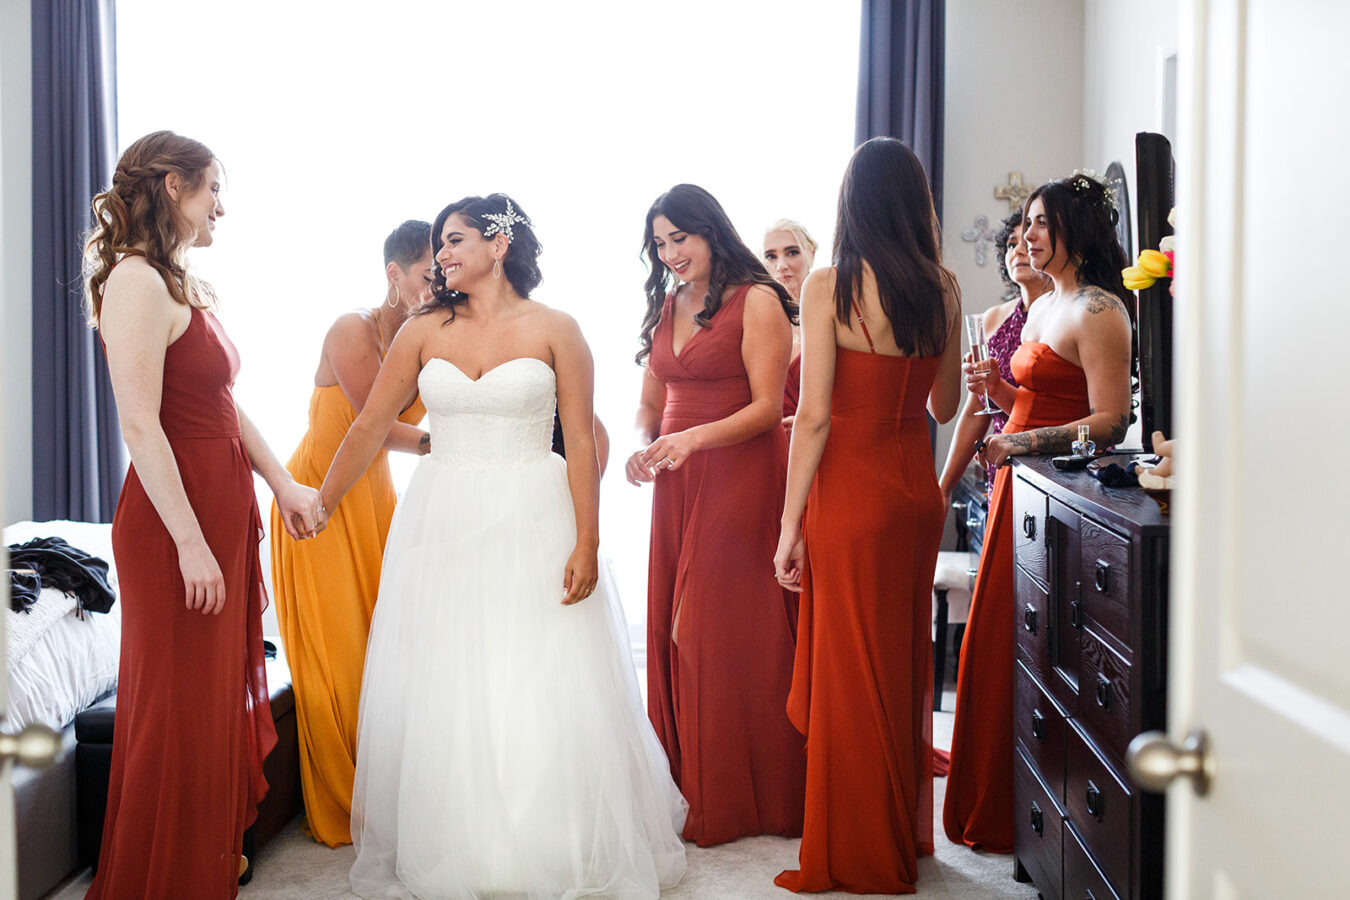 Have fun with your friends and enjoy a mindful, stress-free wedding day.